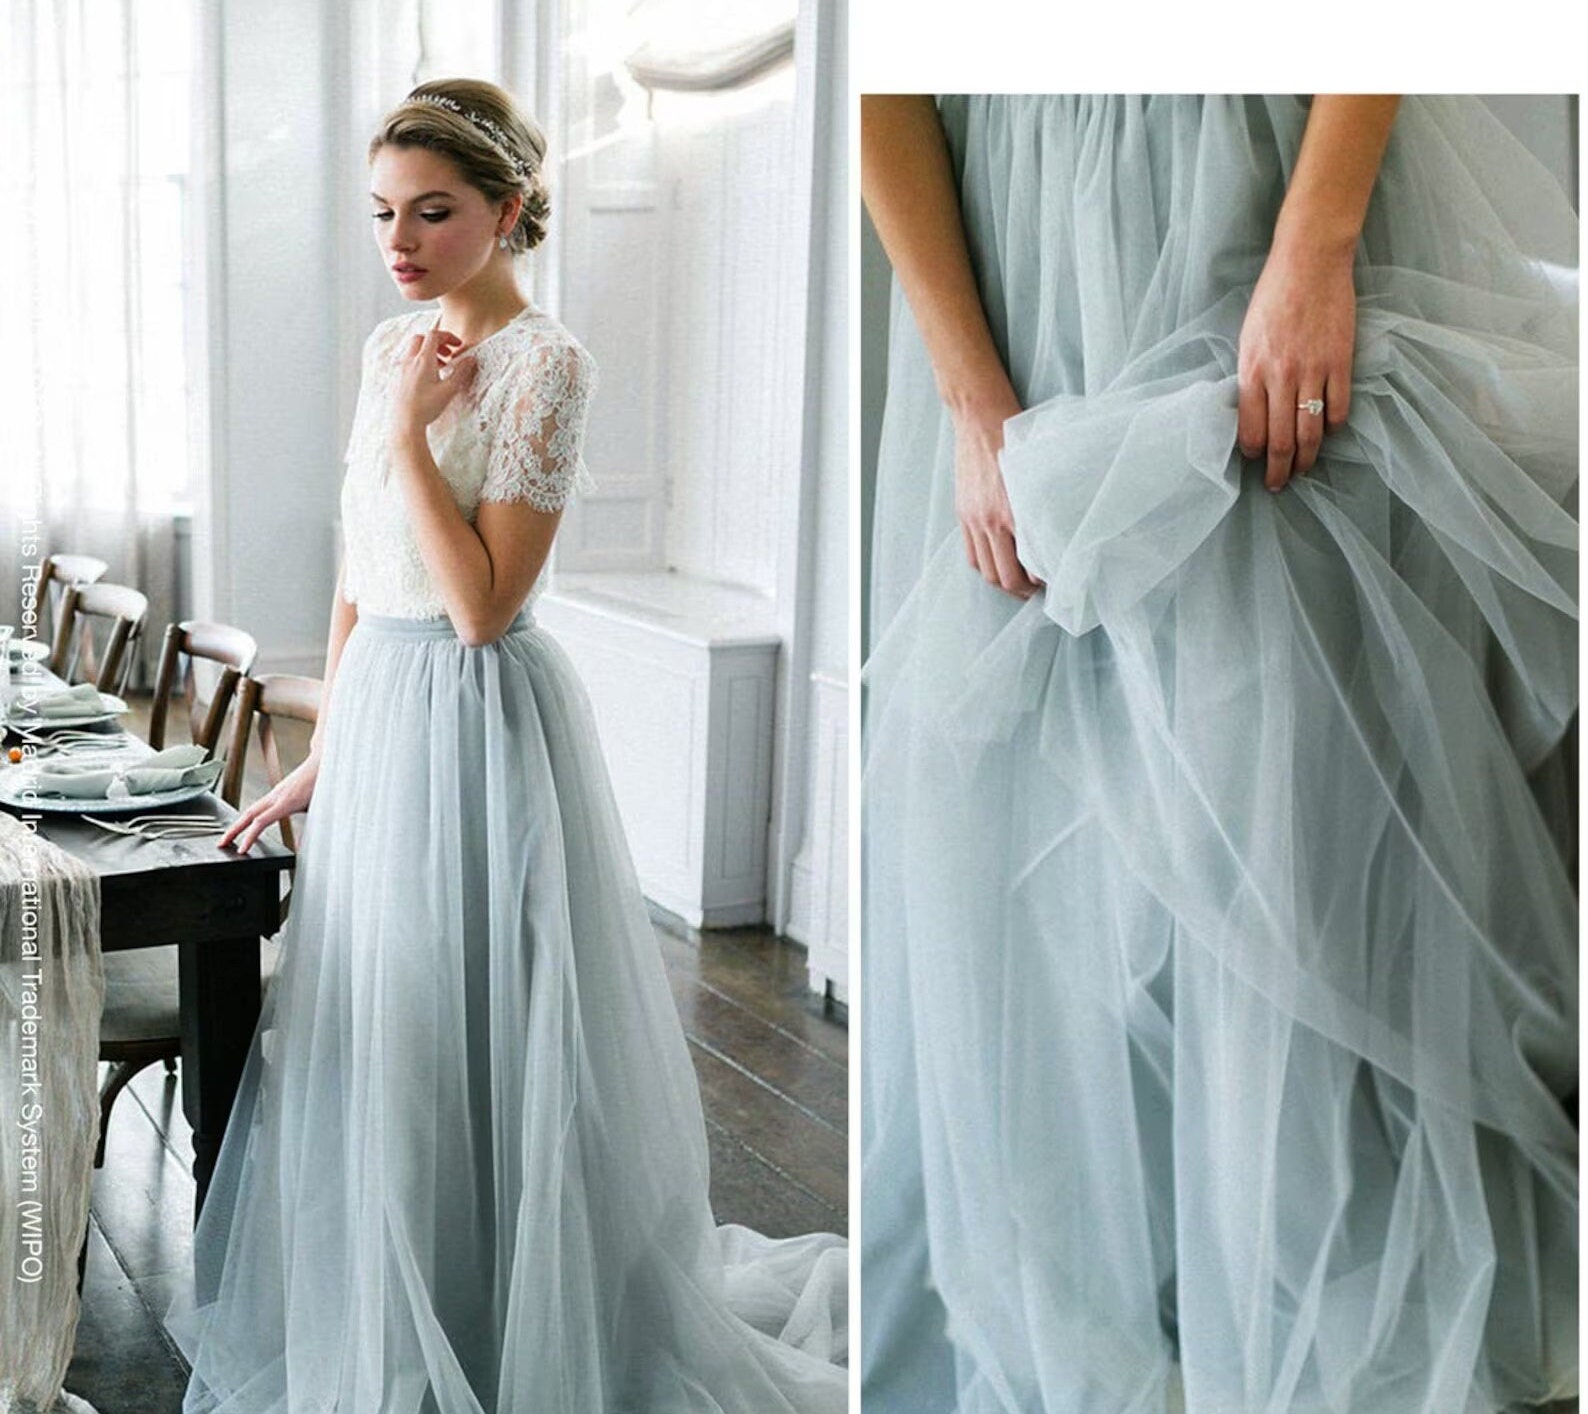 Lush Cascading Tulle Dress in American-style. Sky Blue Tulle Dress. Peach  Dress. Sky Blue Wedding Dress. Lavender Tulle Bridel Gowns -  Norway